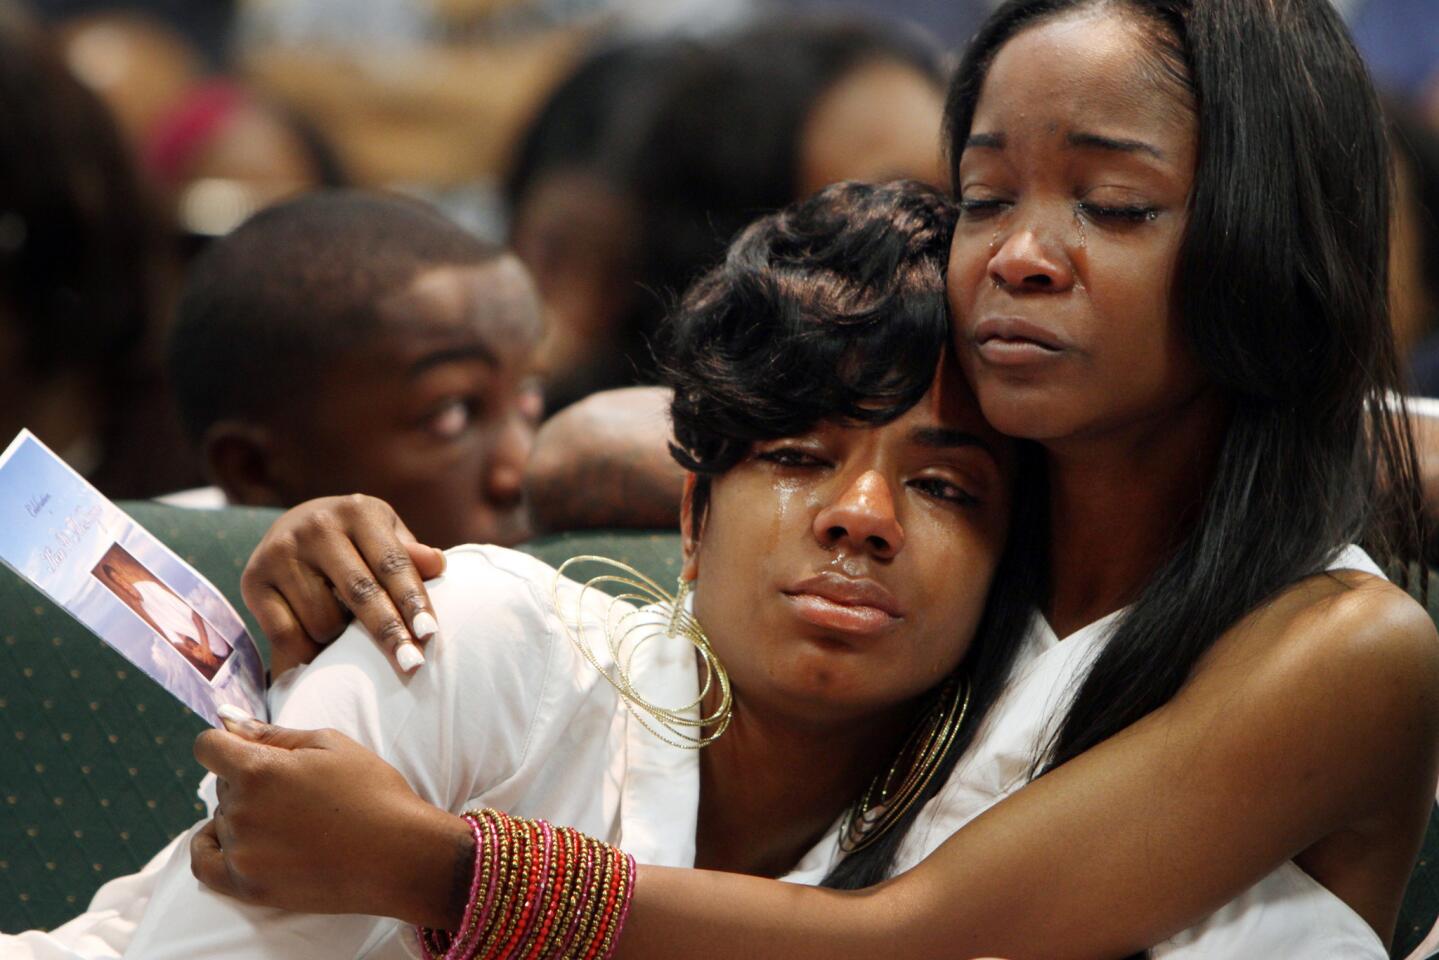 Ken McRoyal's sister Kenesha, left, is consoled by his girlfriend, Latrese Williams, during his memorial service at Mission Ebenezer Family Church in Carson. McRoyal was fatally shot on Mother's Day.